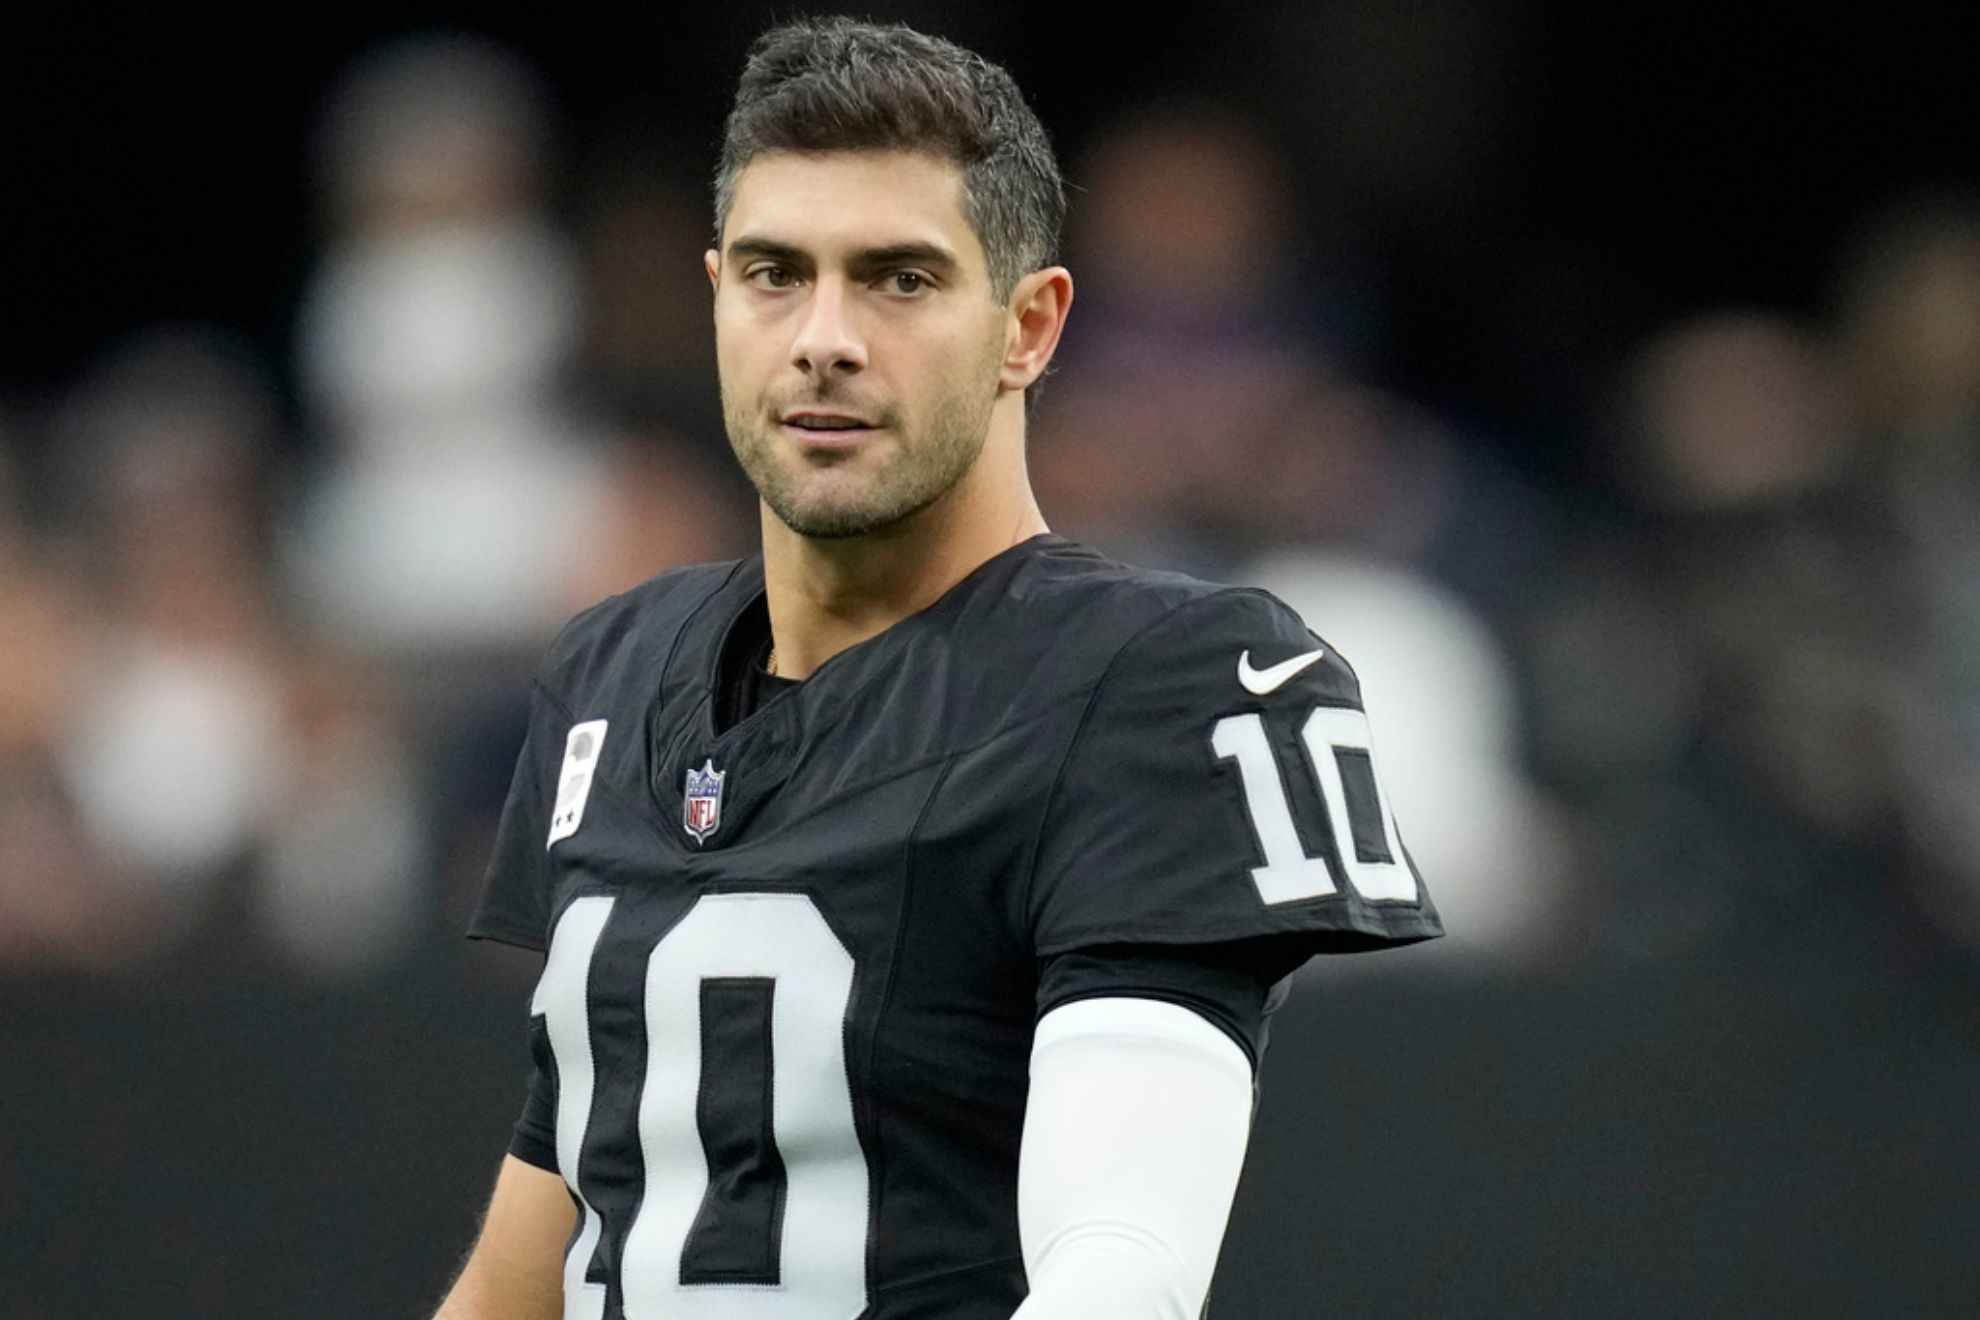 Jimmy G will compliment Stafford in the QB room for the Rams